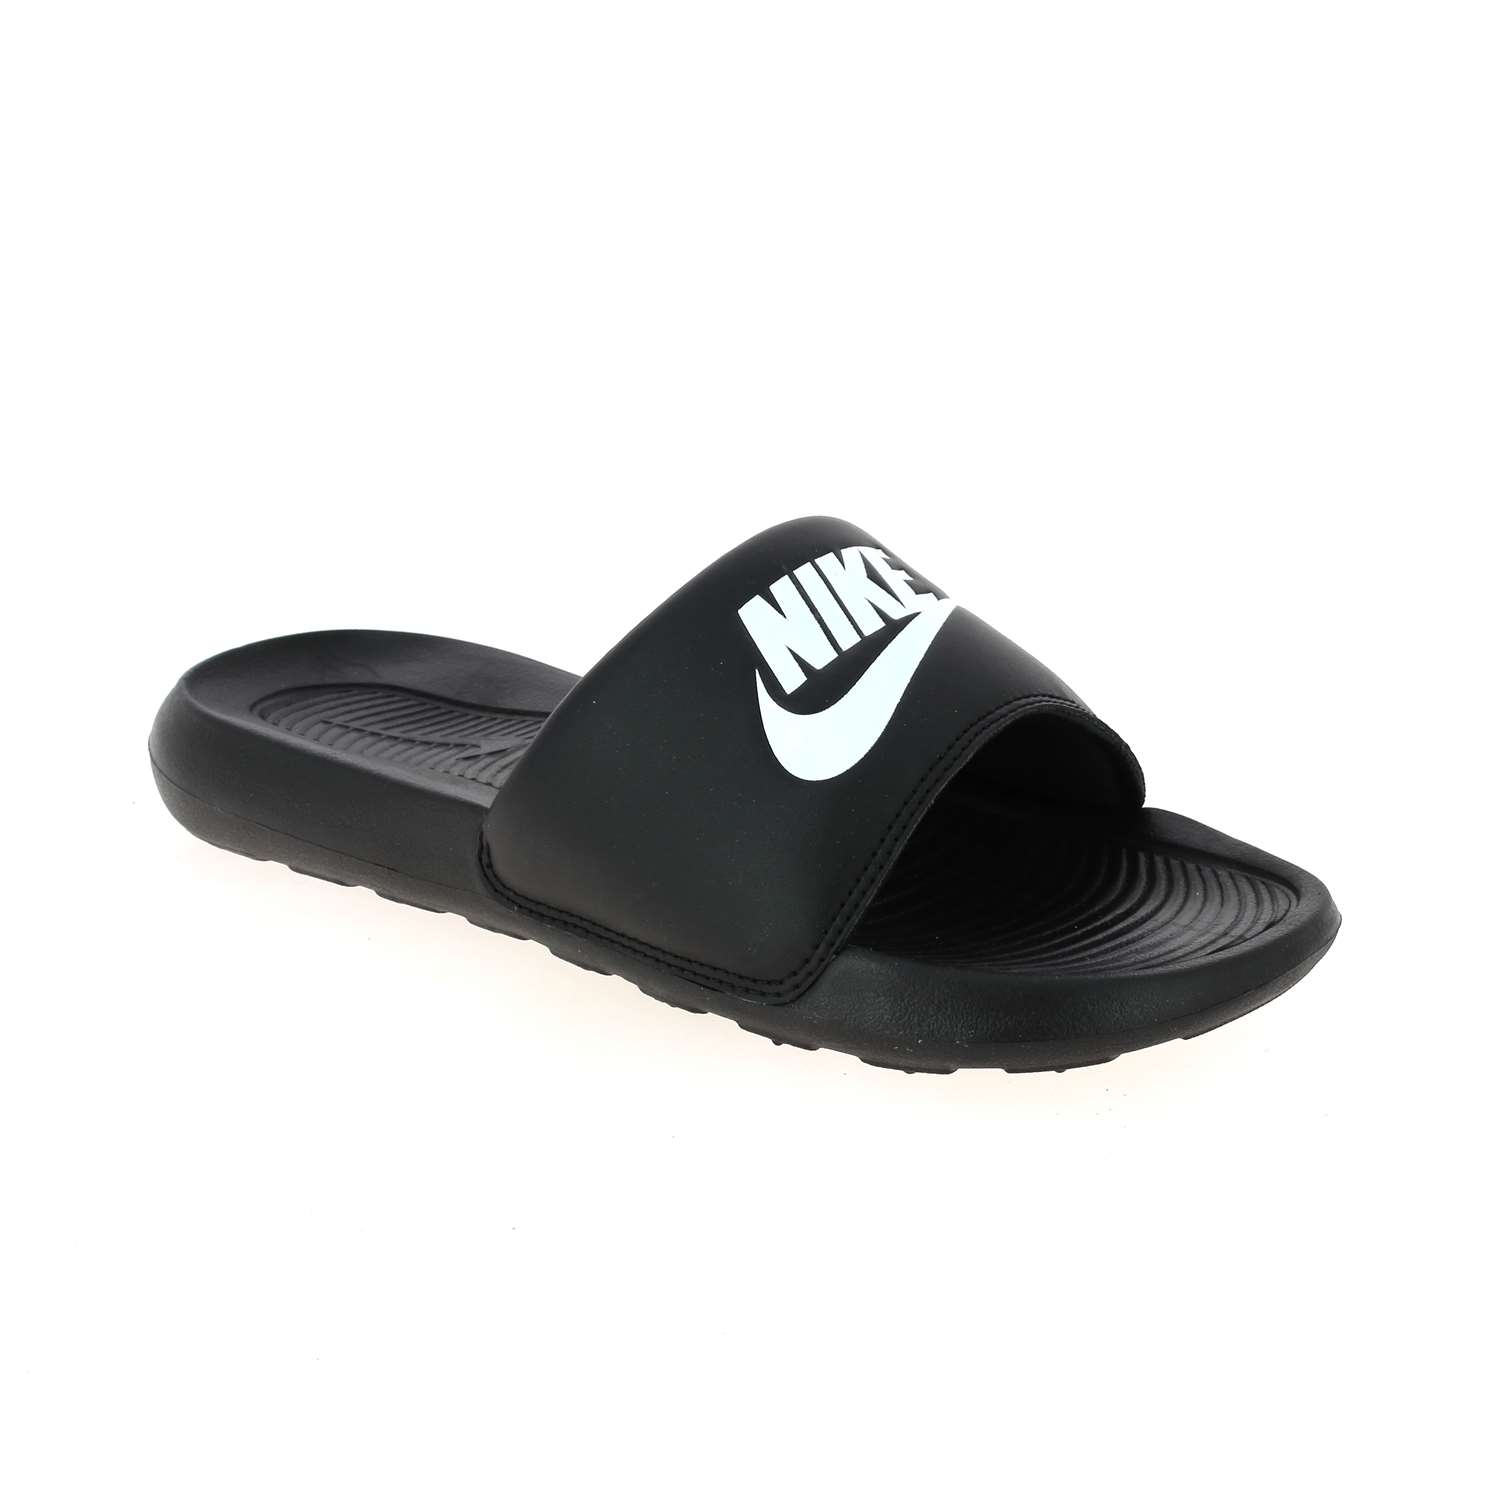 01 - VICTORI ONE - NIKE - Tongs et crocs - Synthétique